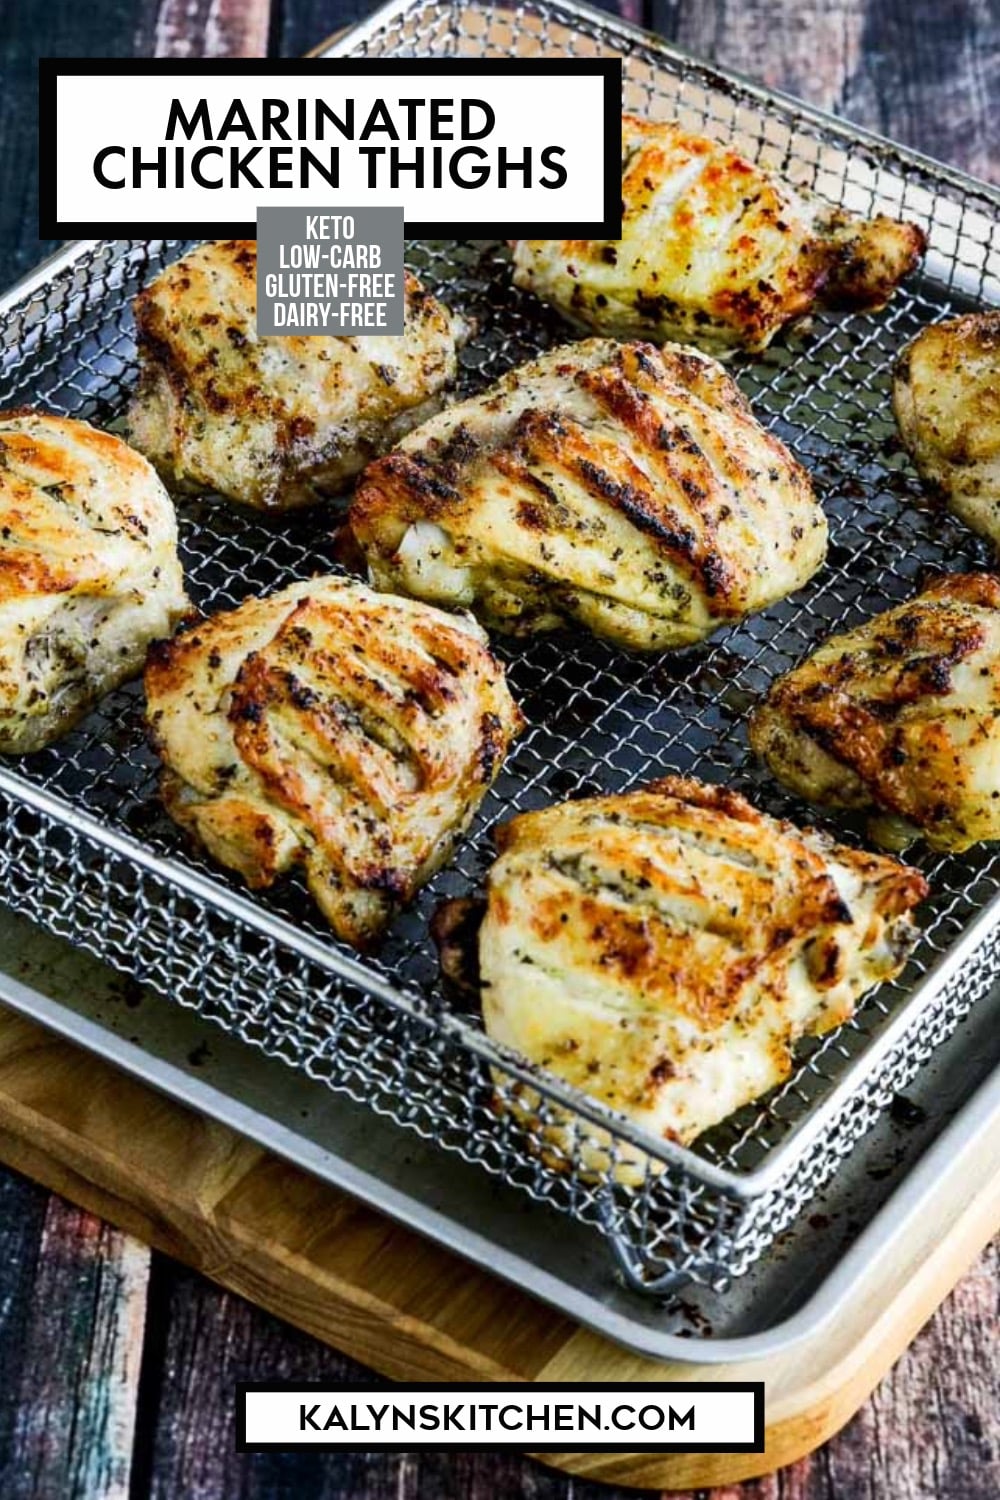 Pinterest image of Marinated Chicken Thighs